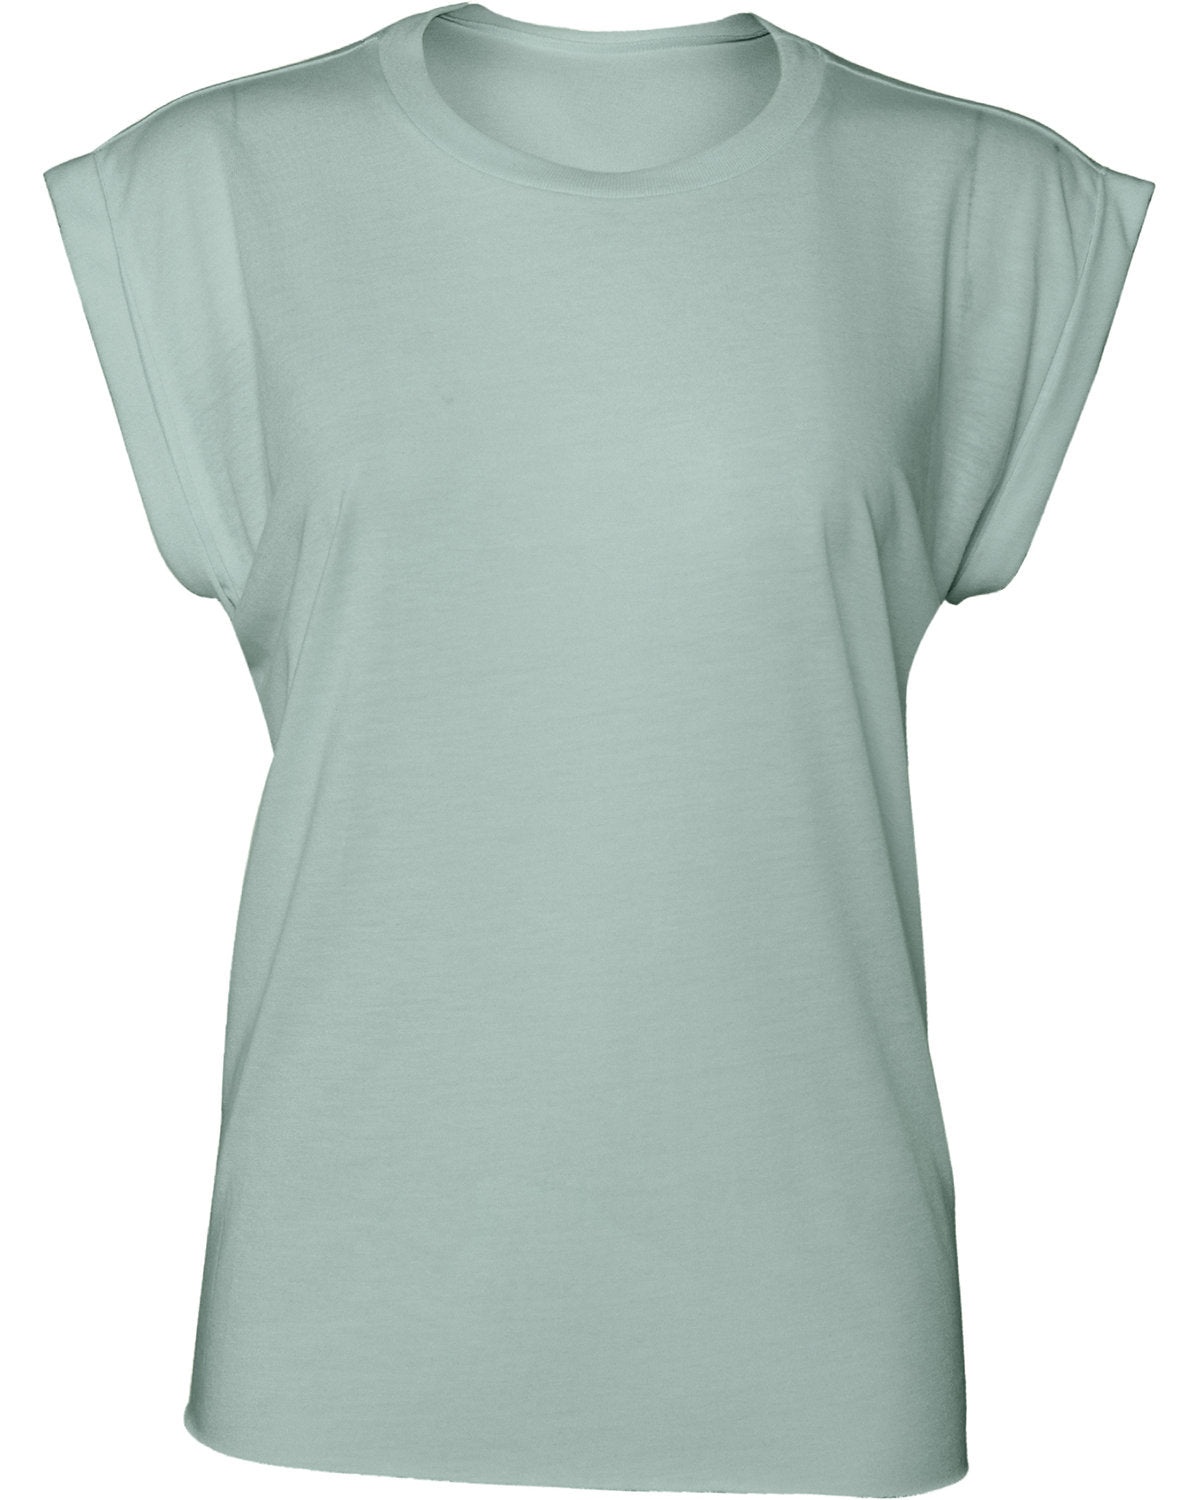 Deep teal heather; front view.